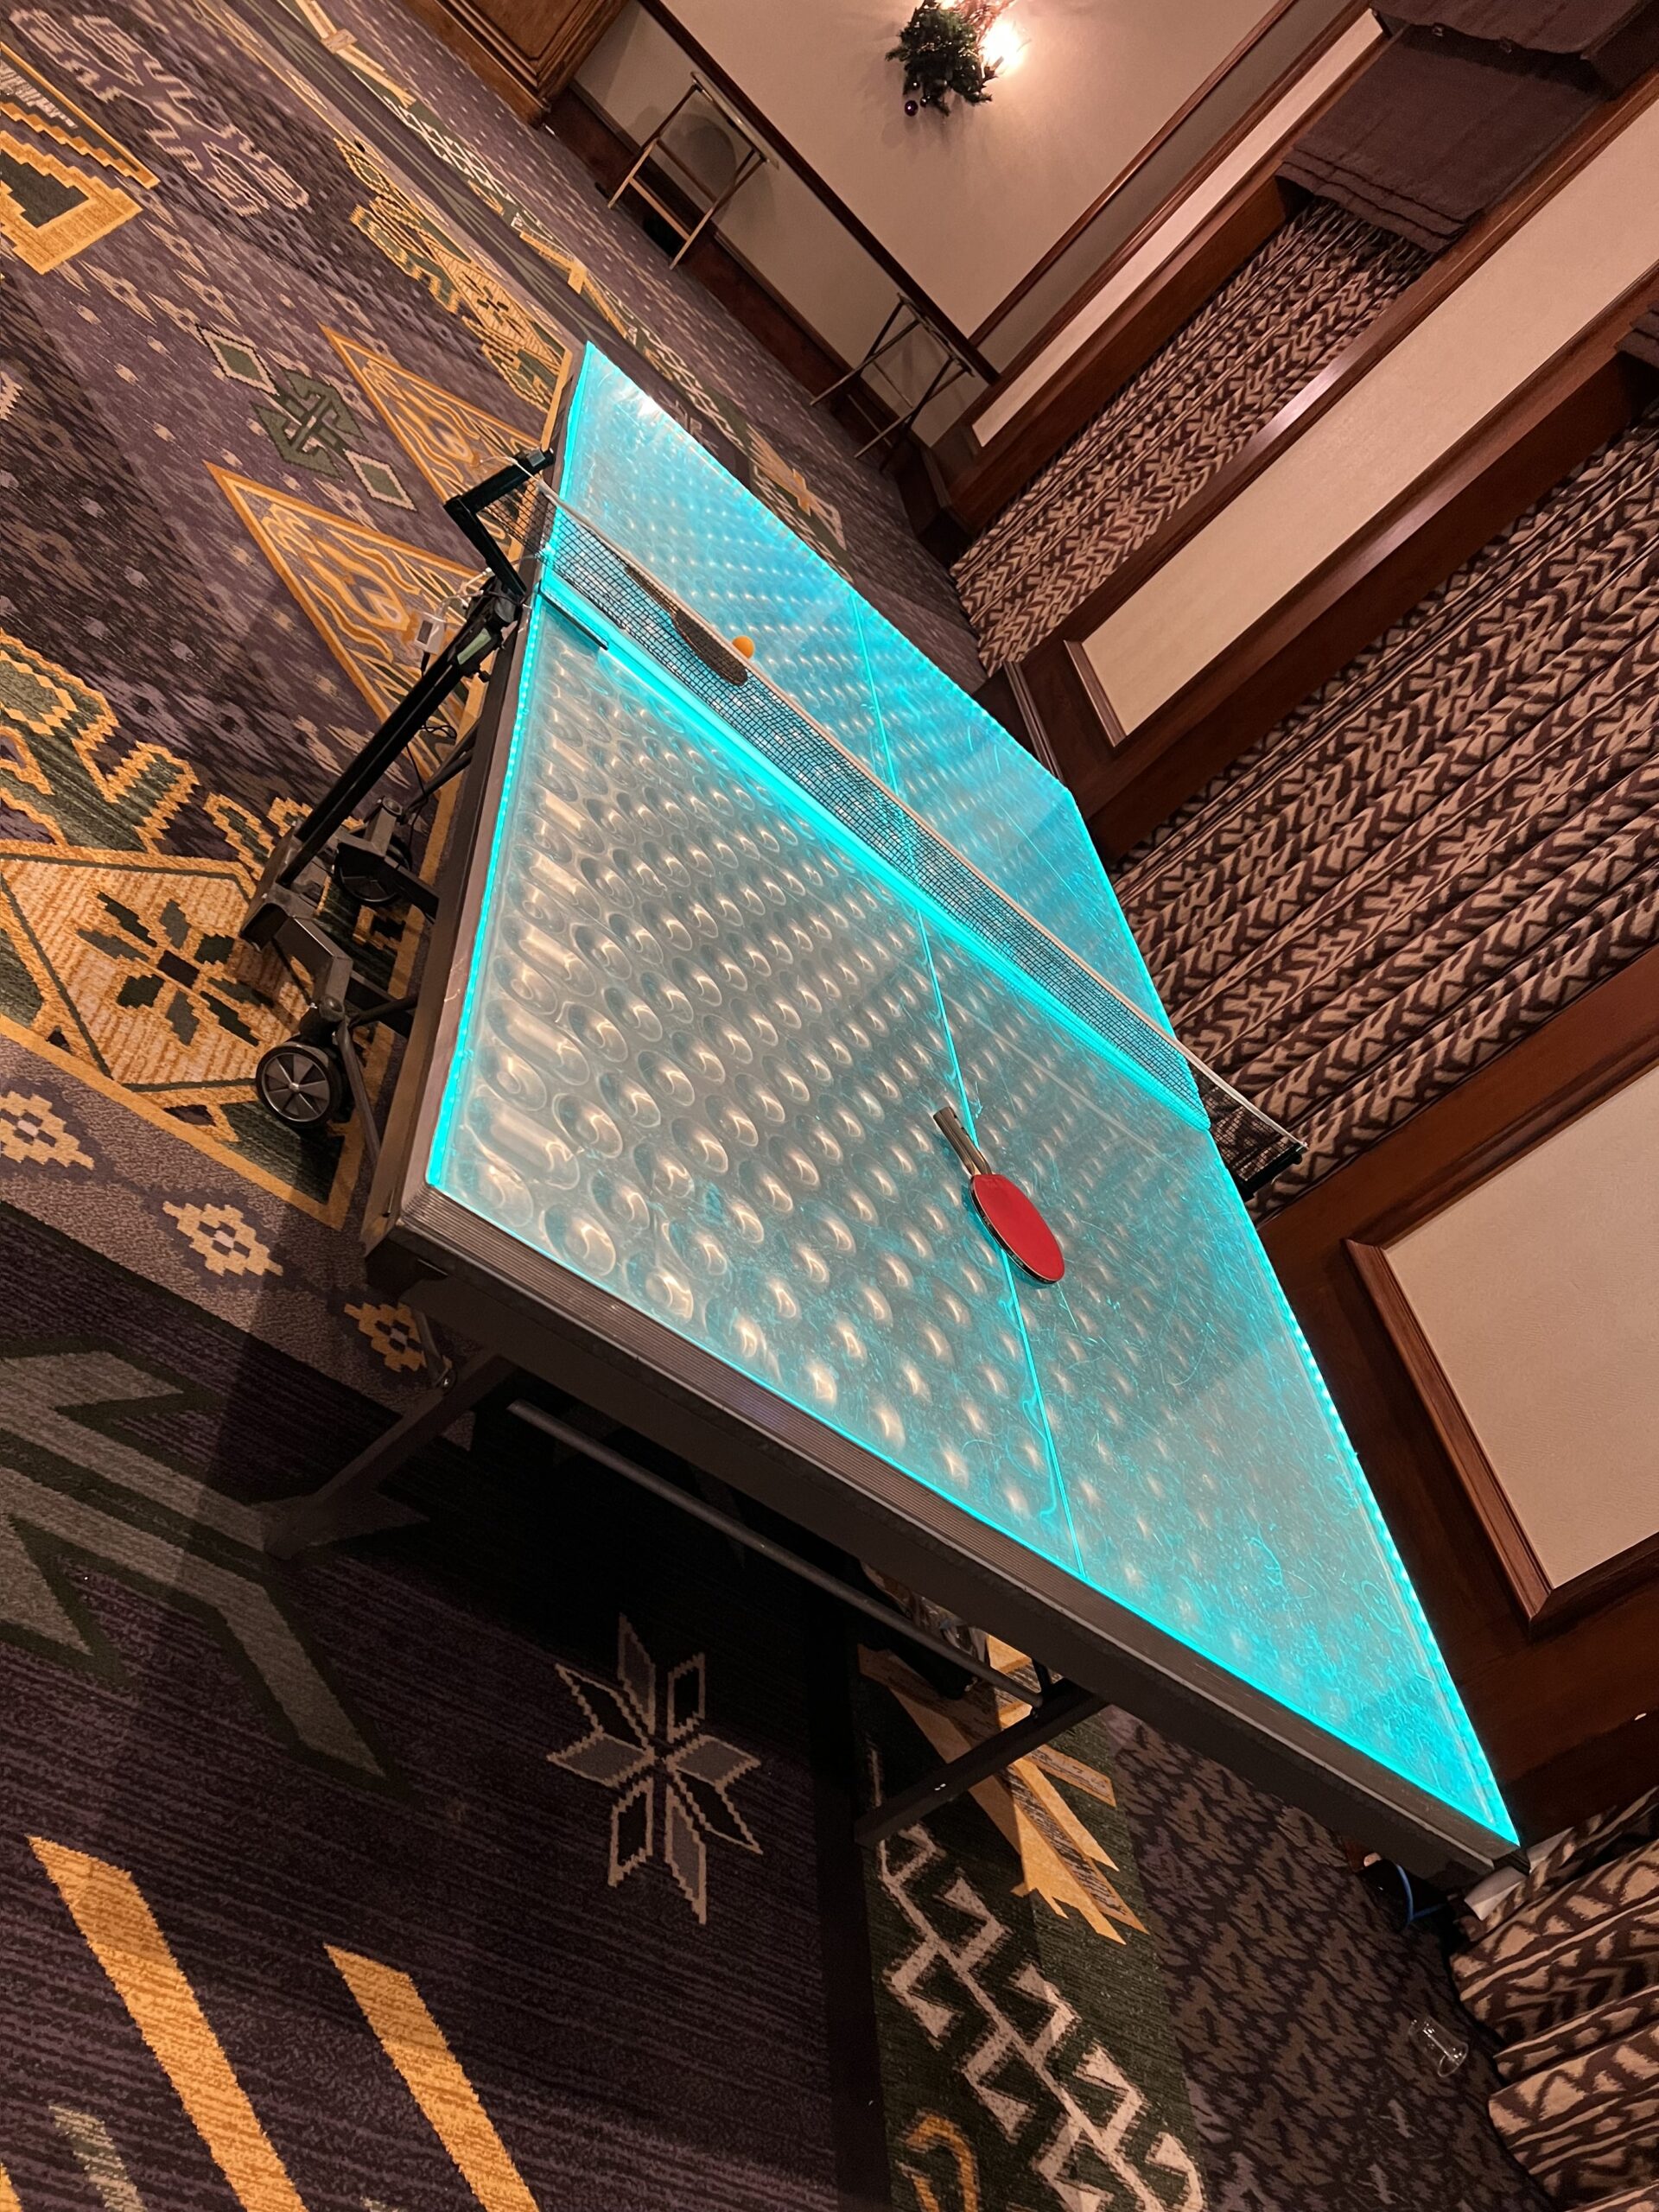 LED Ping Pong Table - Xtreme Entertainment